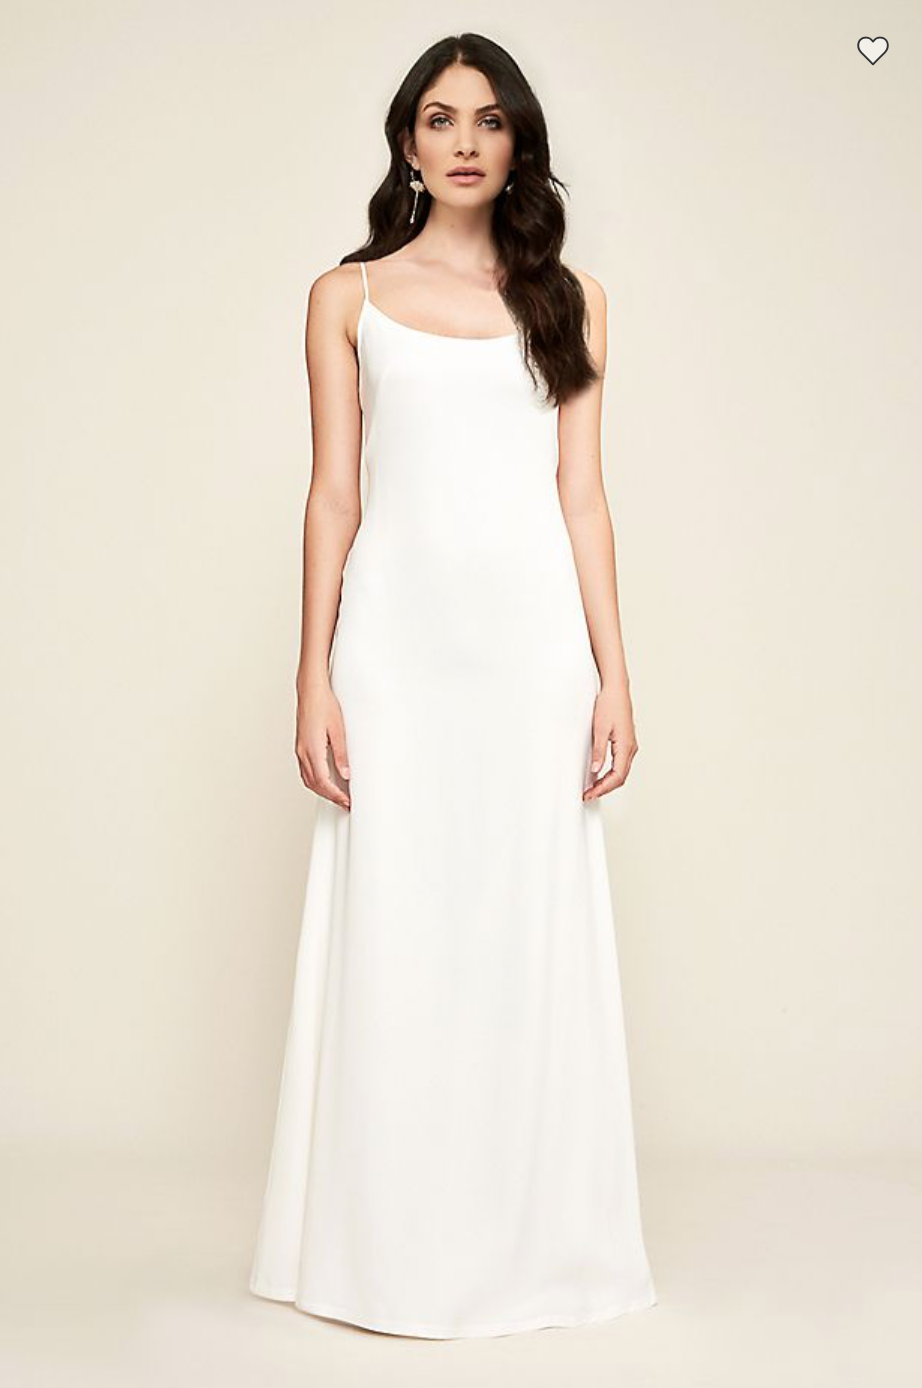 Slip Wedding Dresses Top 10 Slip Wedding Dresses Find The Perfect Venue For Your Special 1273